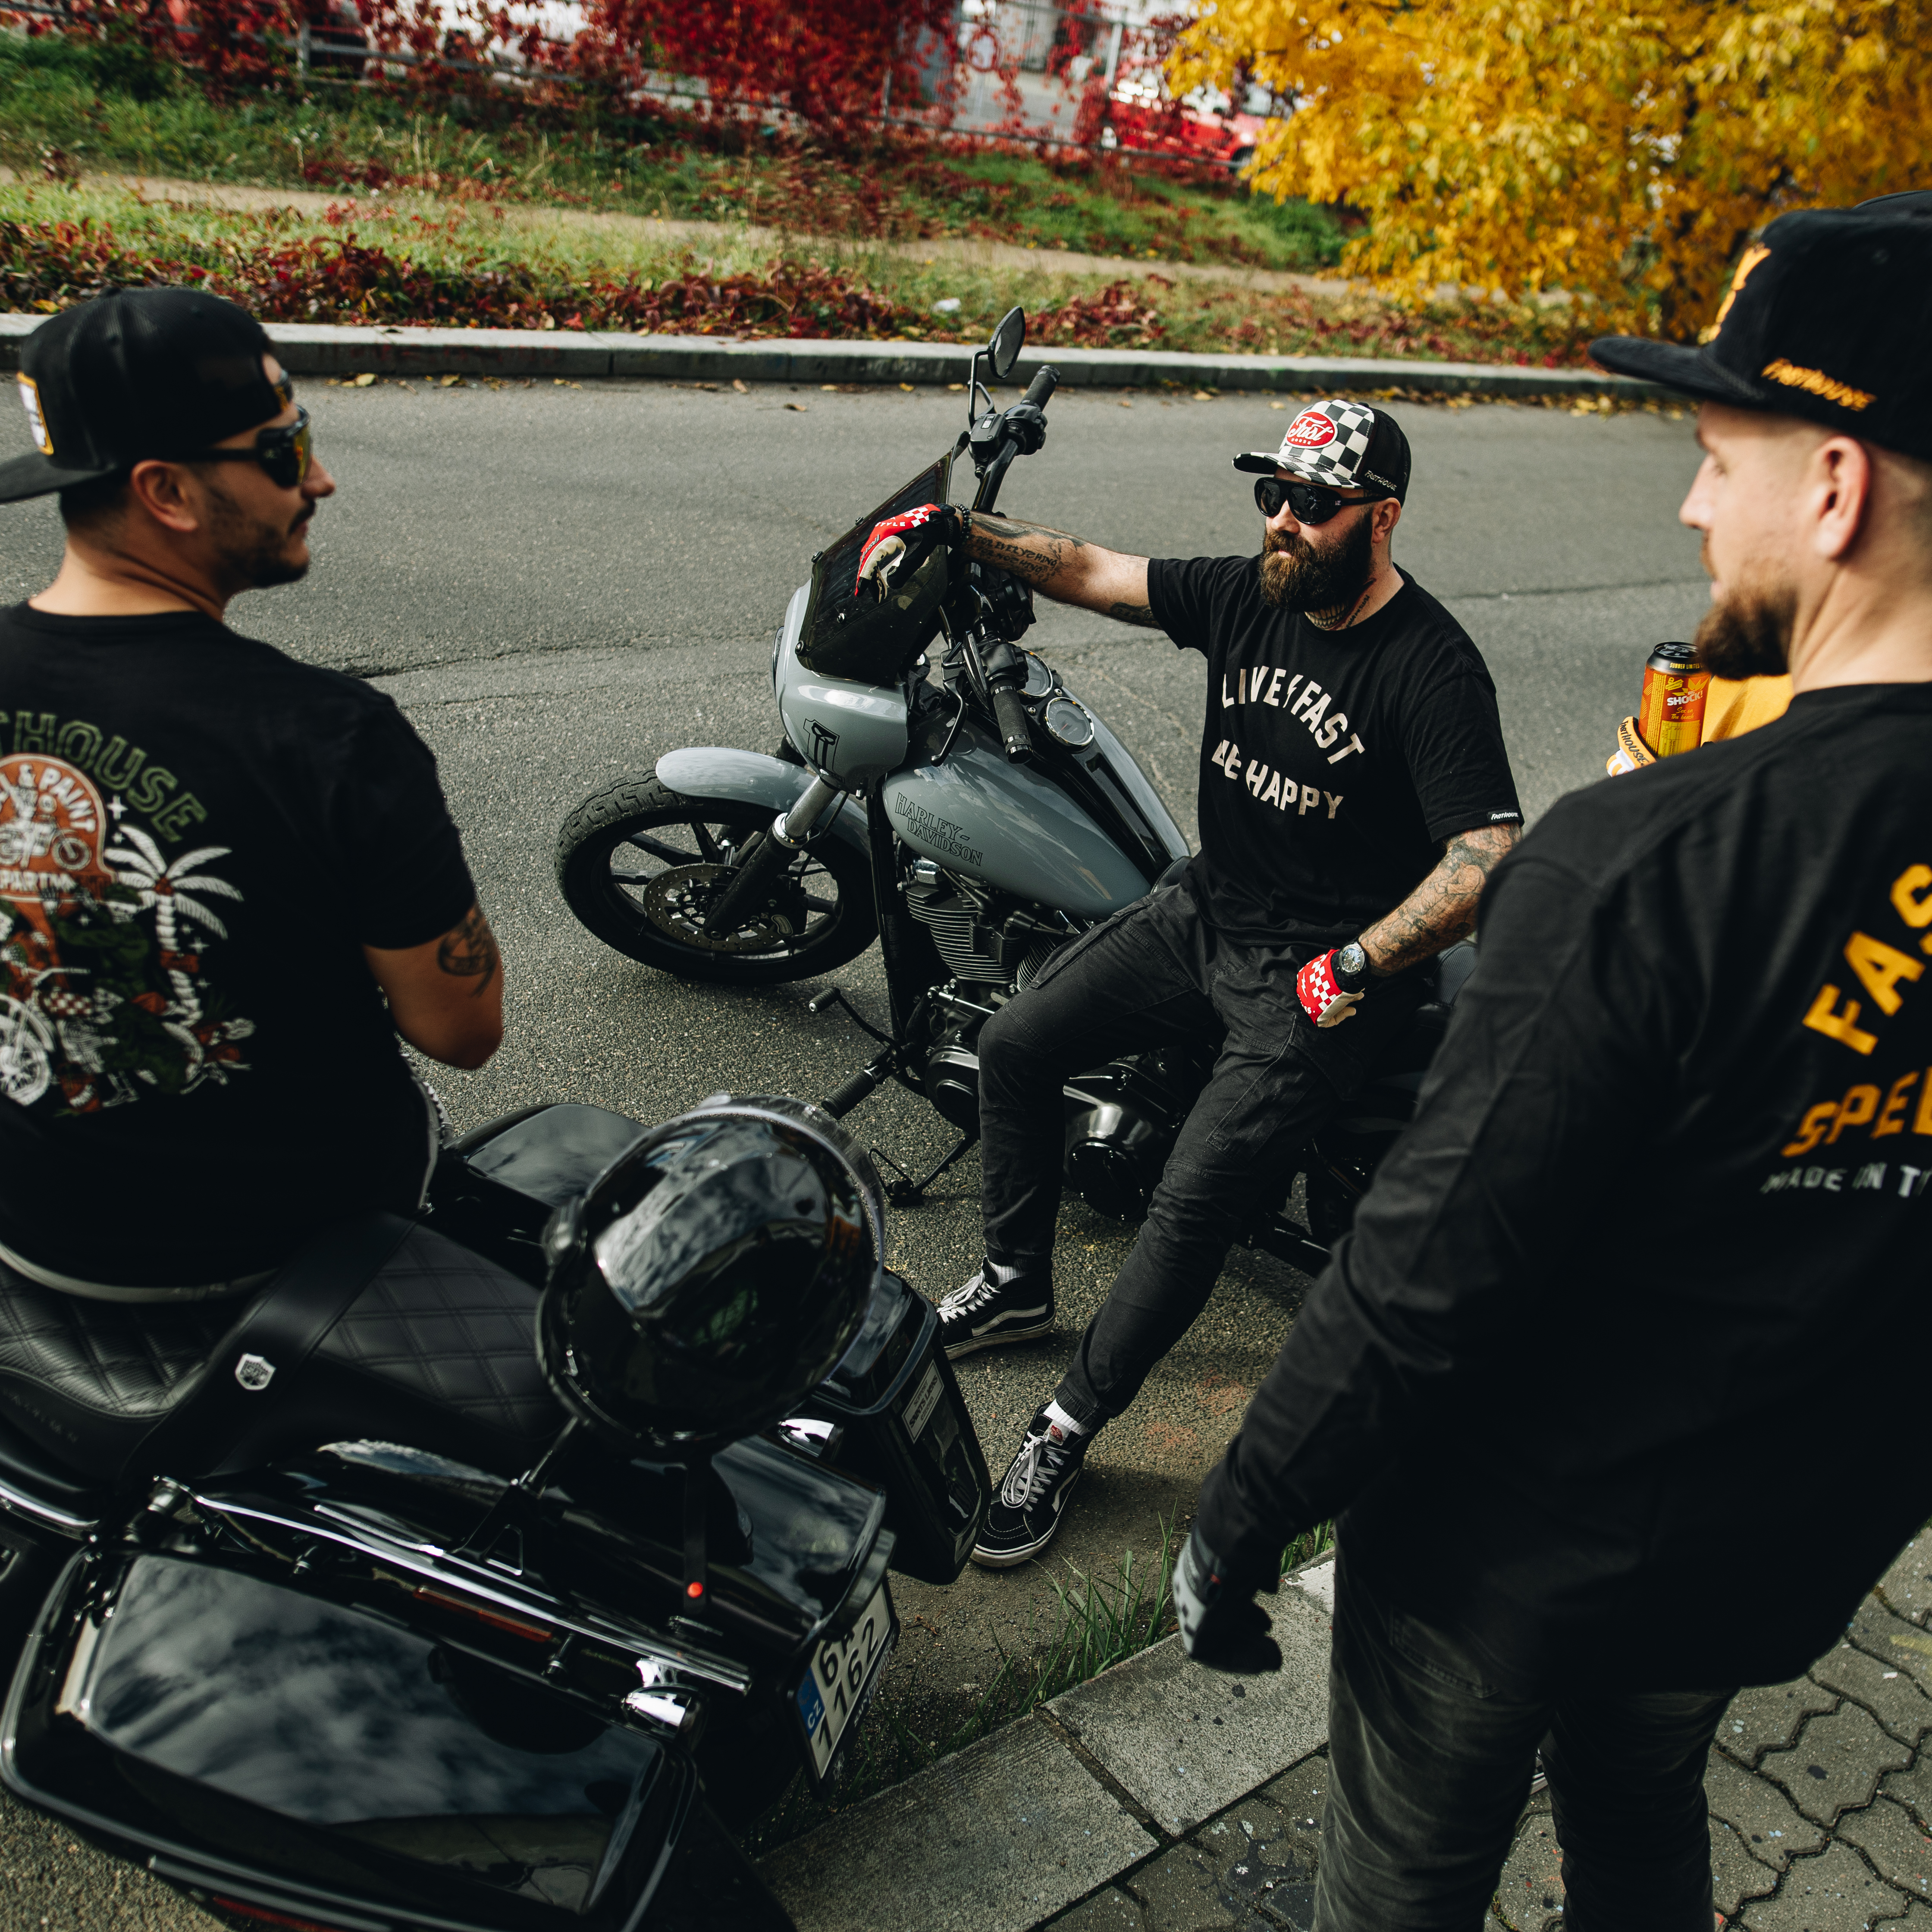 Guys on the Clubstyle Harley-Davidson Motorcycles